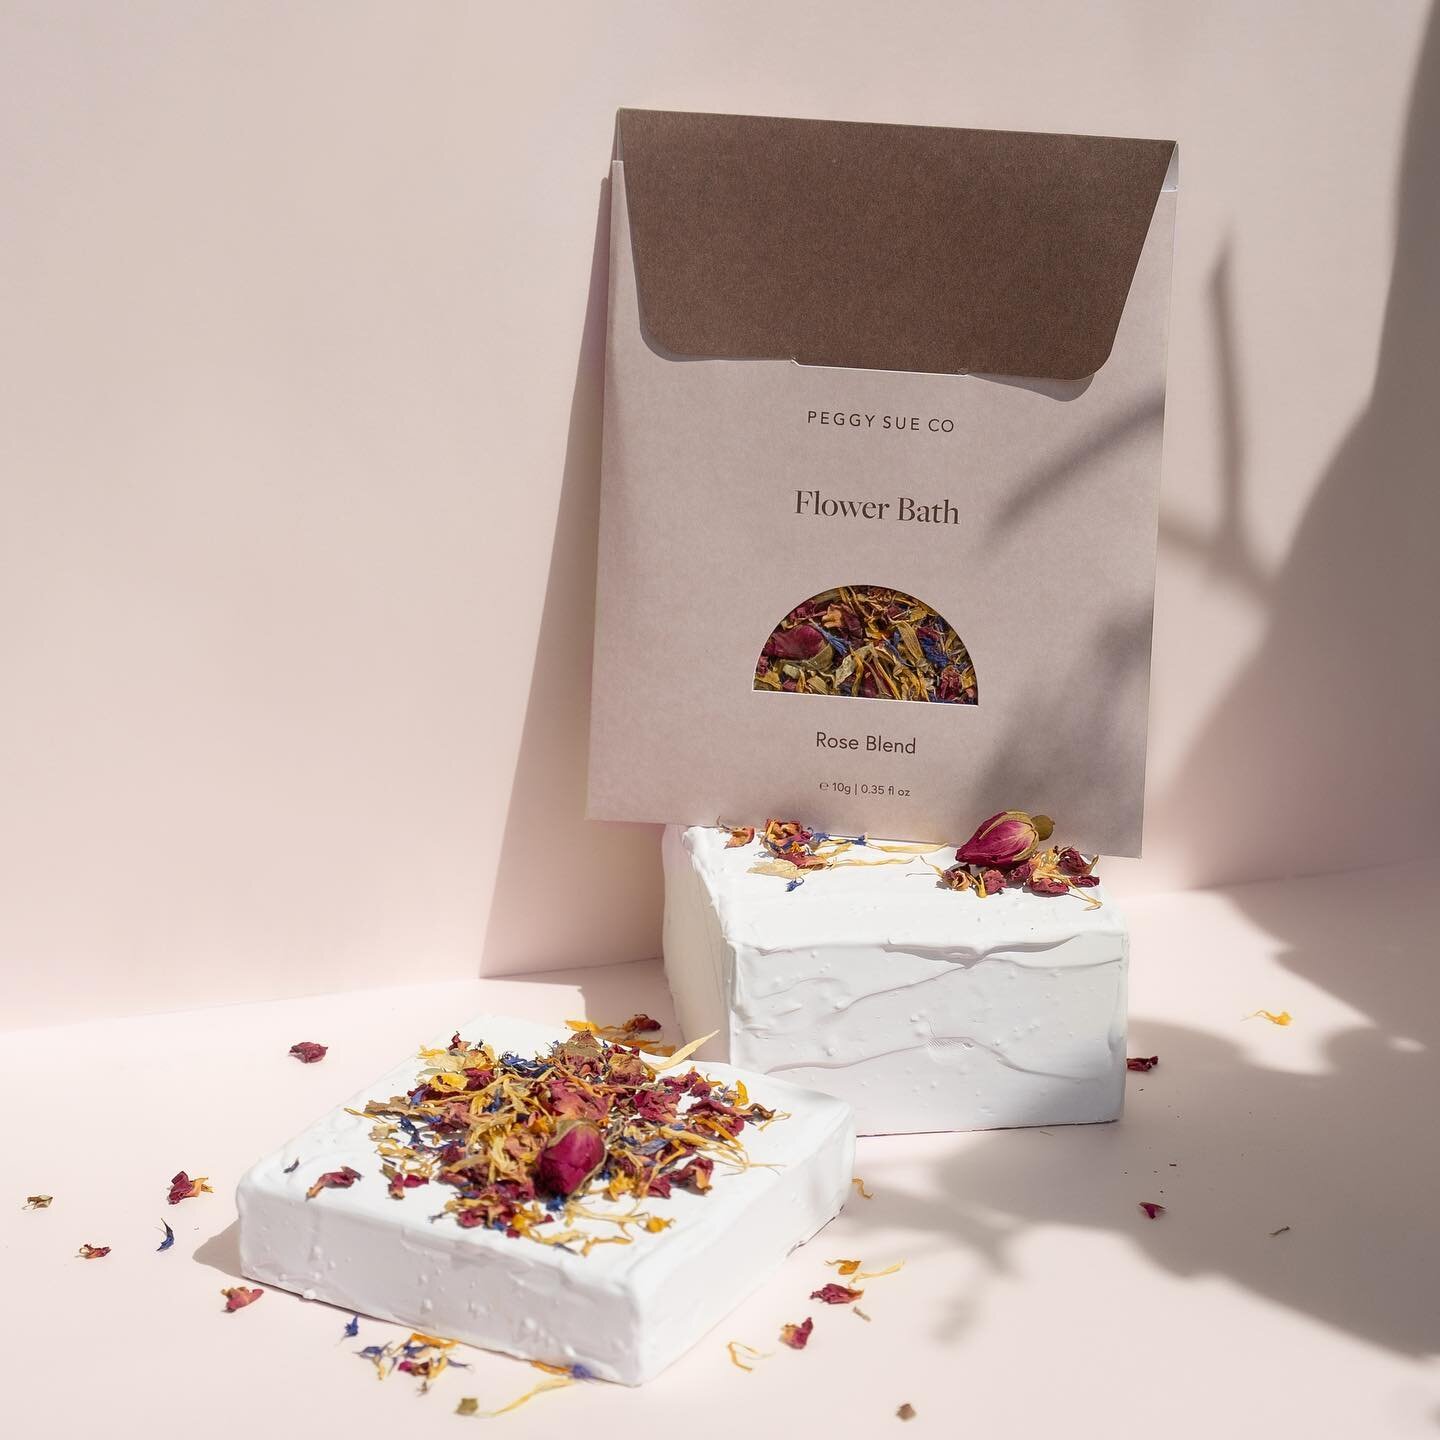 Peggy Sue now in store!

Peggy Sue is an ethical brand cultivating a community that slows down with beautiful moments of sustainable self-care.

The soap bars and flower soaks are just divine 💫

@peggysue.co

#ethical #sustainable #skincare